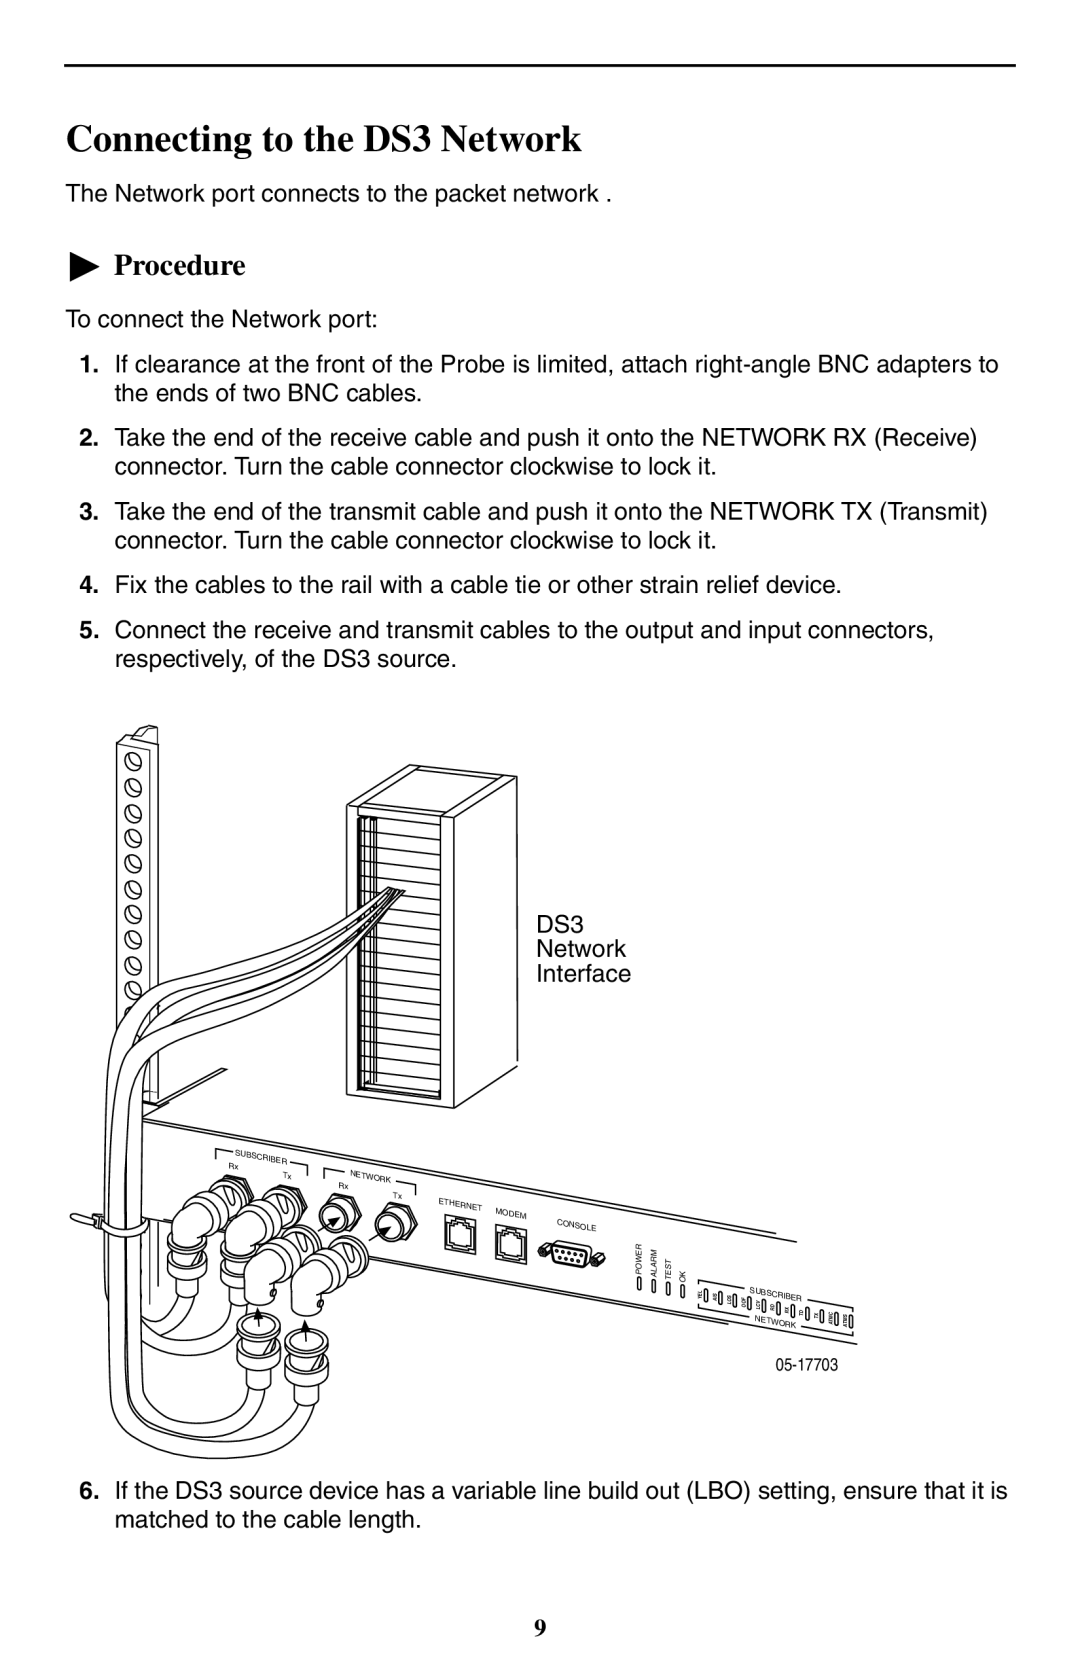 Paradyne 9550 DS3 installation instructions Connecting to the DS3 Network, DS3 Network Interface, Procedure 